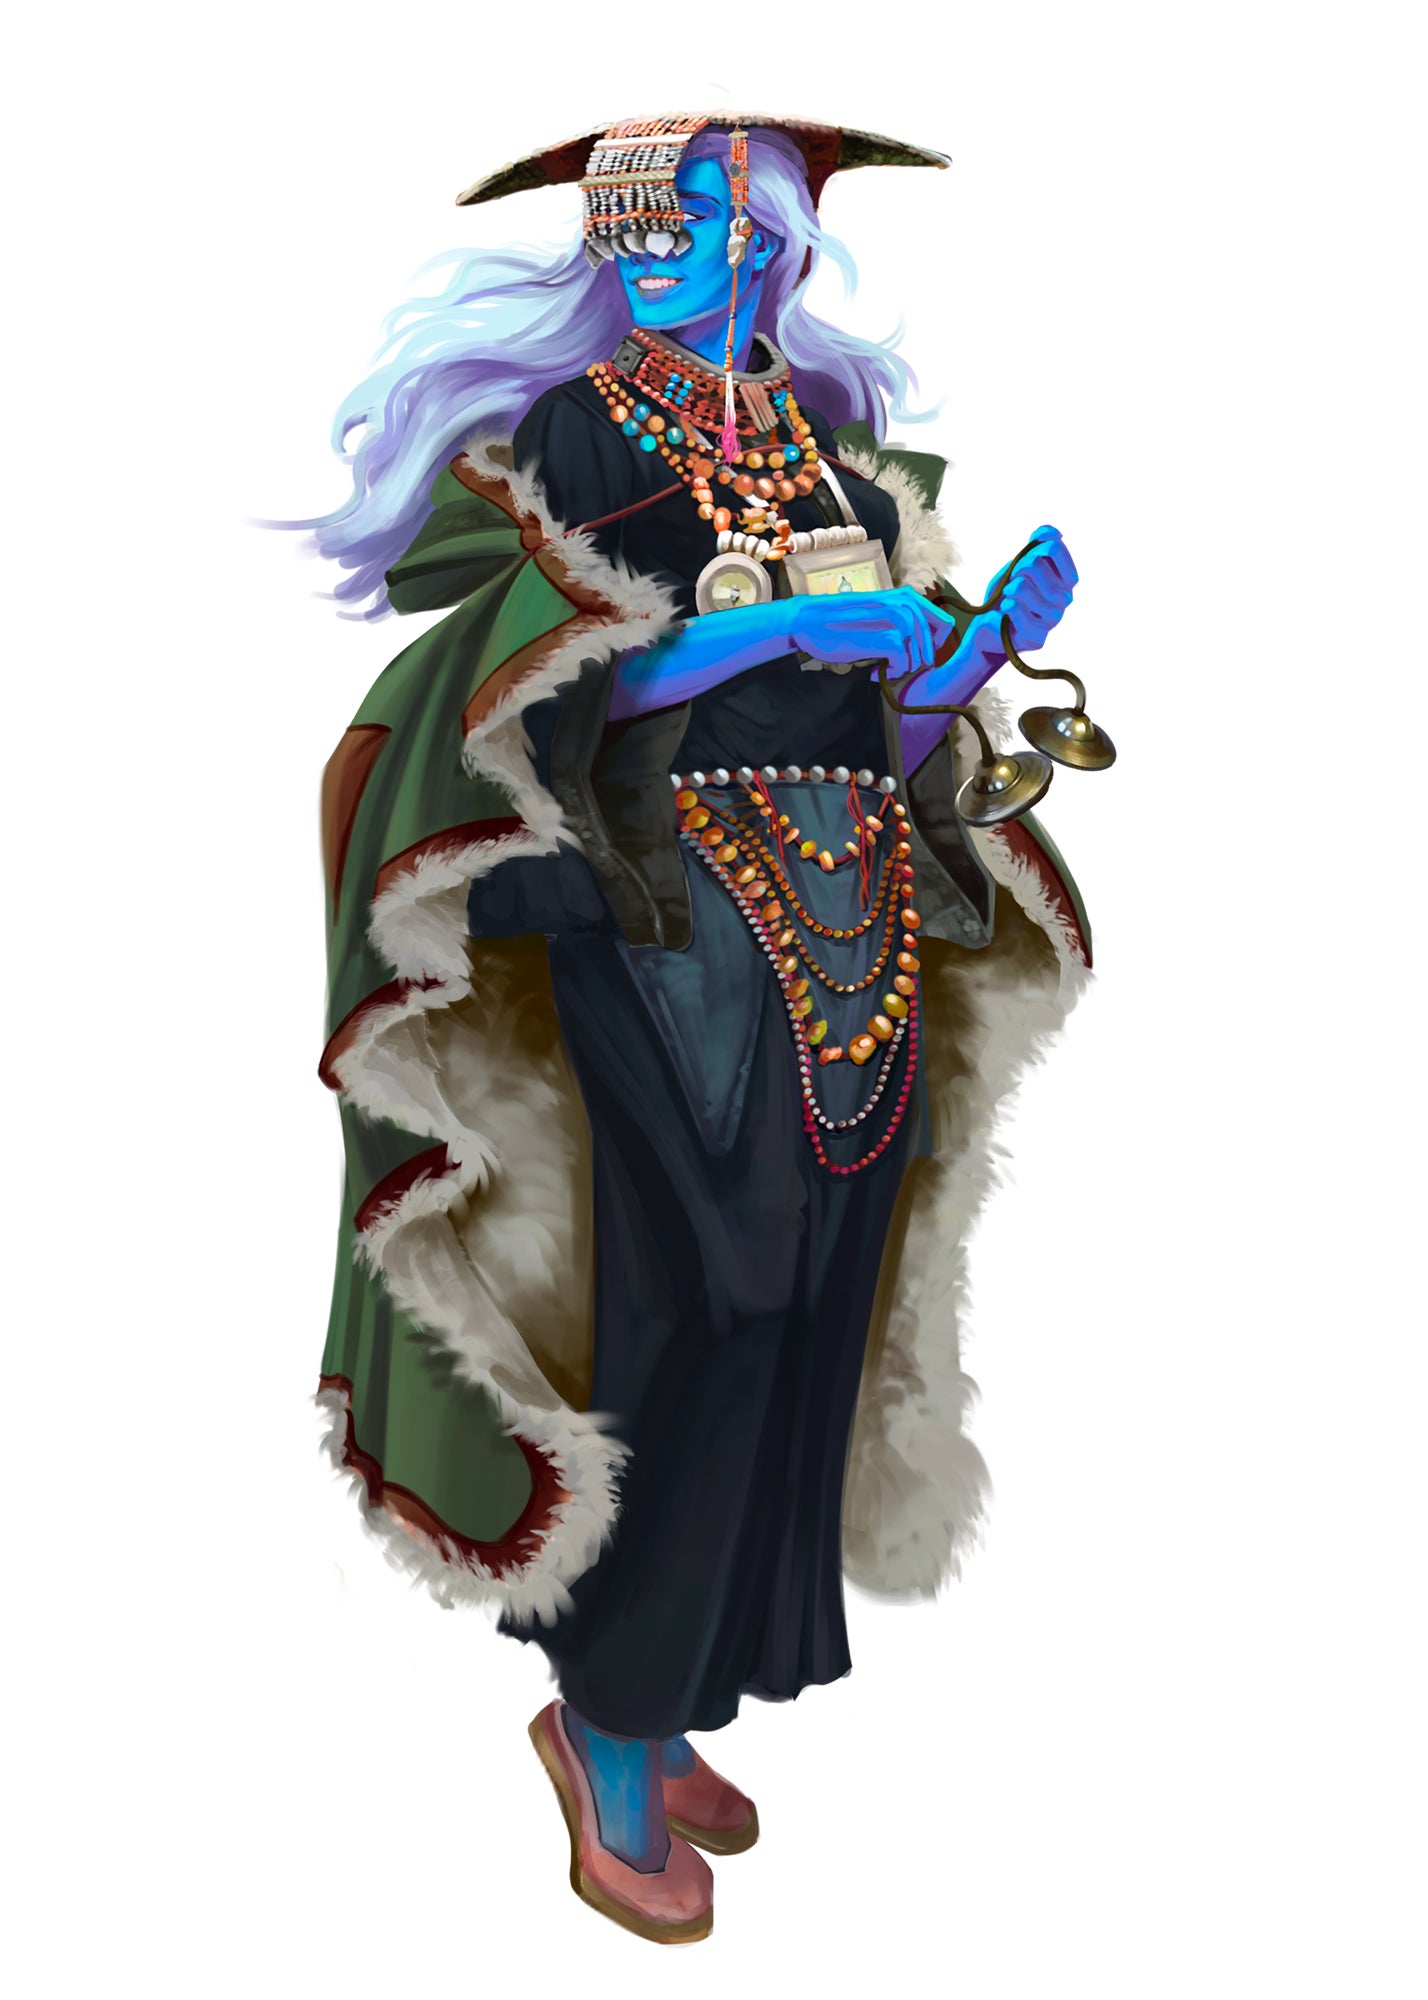 A blue skinned, white haired humanoid figure wearing a dark blue dress with beaded jewelry and vail